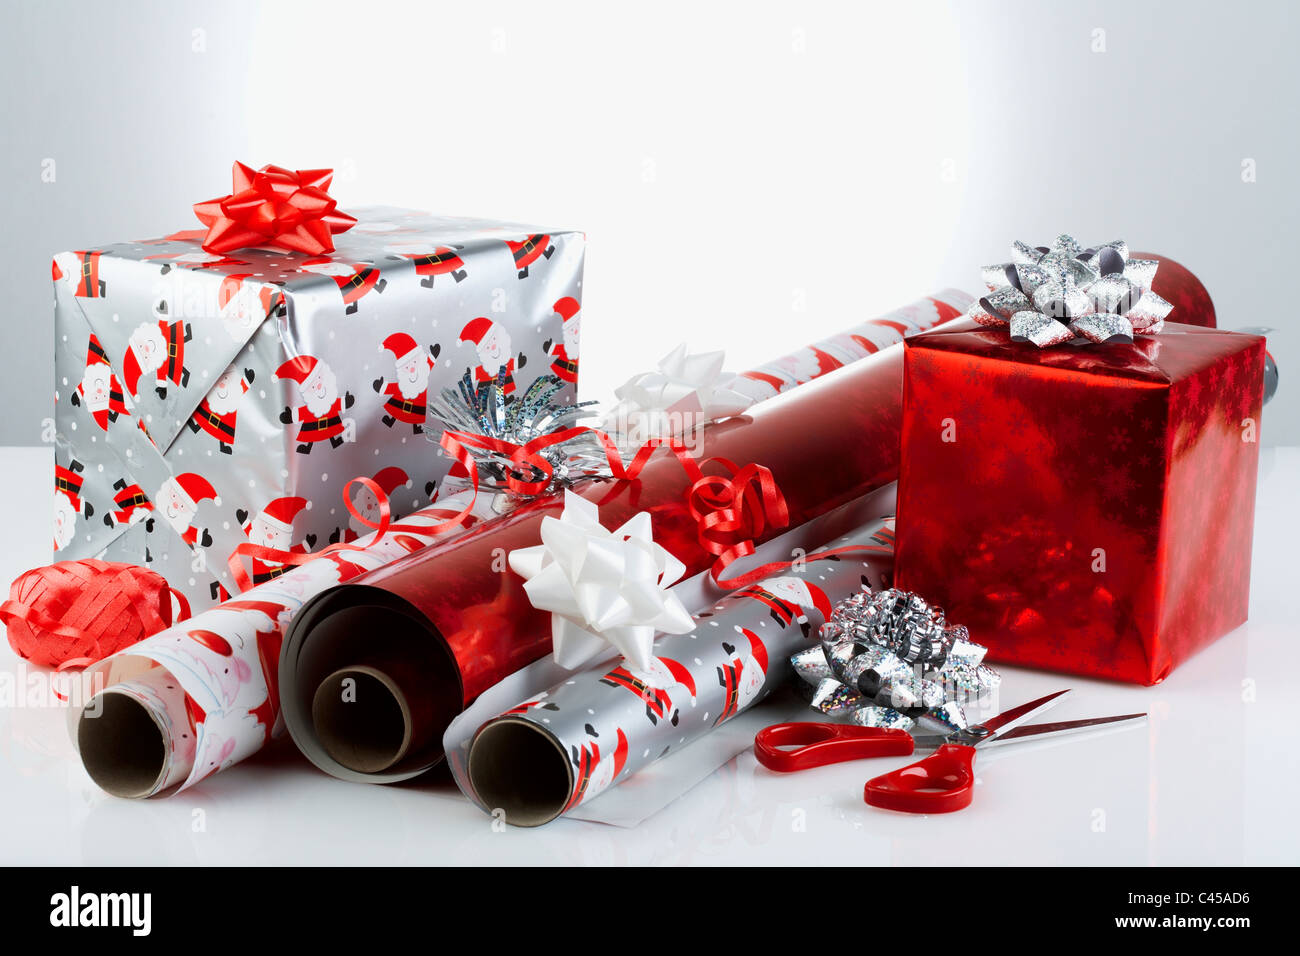 Christmas gifts with wrapping paper and scissors, close-up Stock Photo